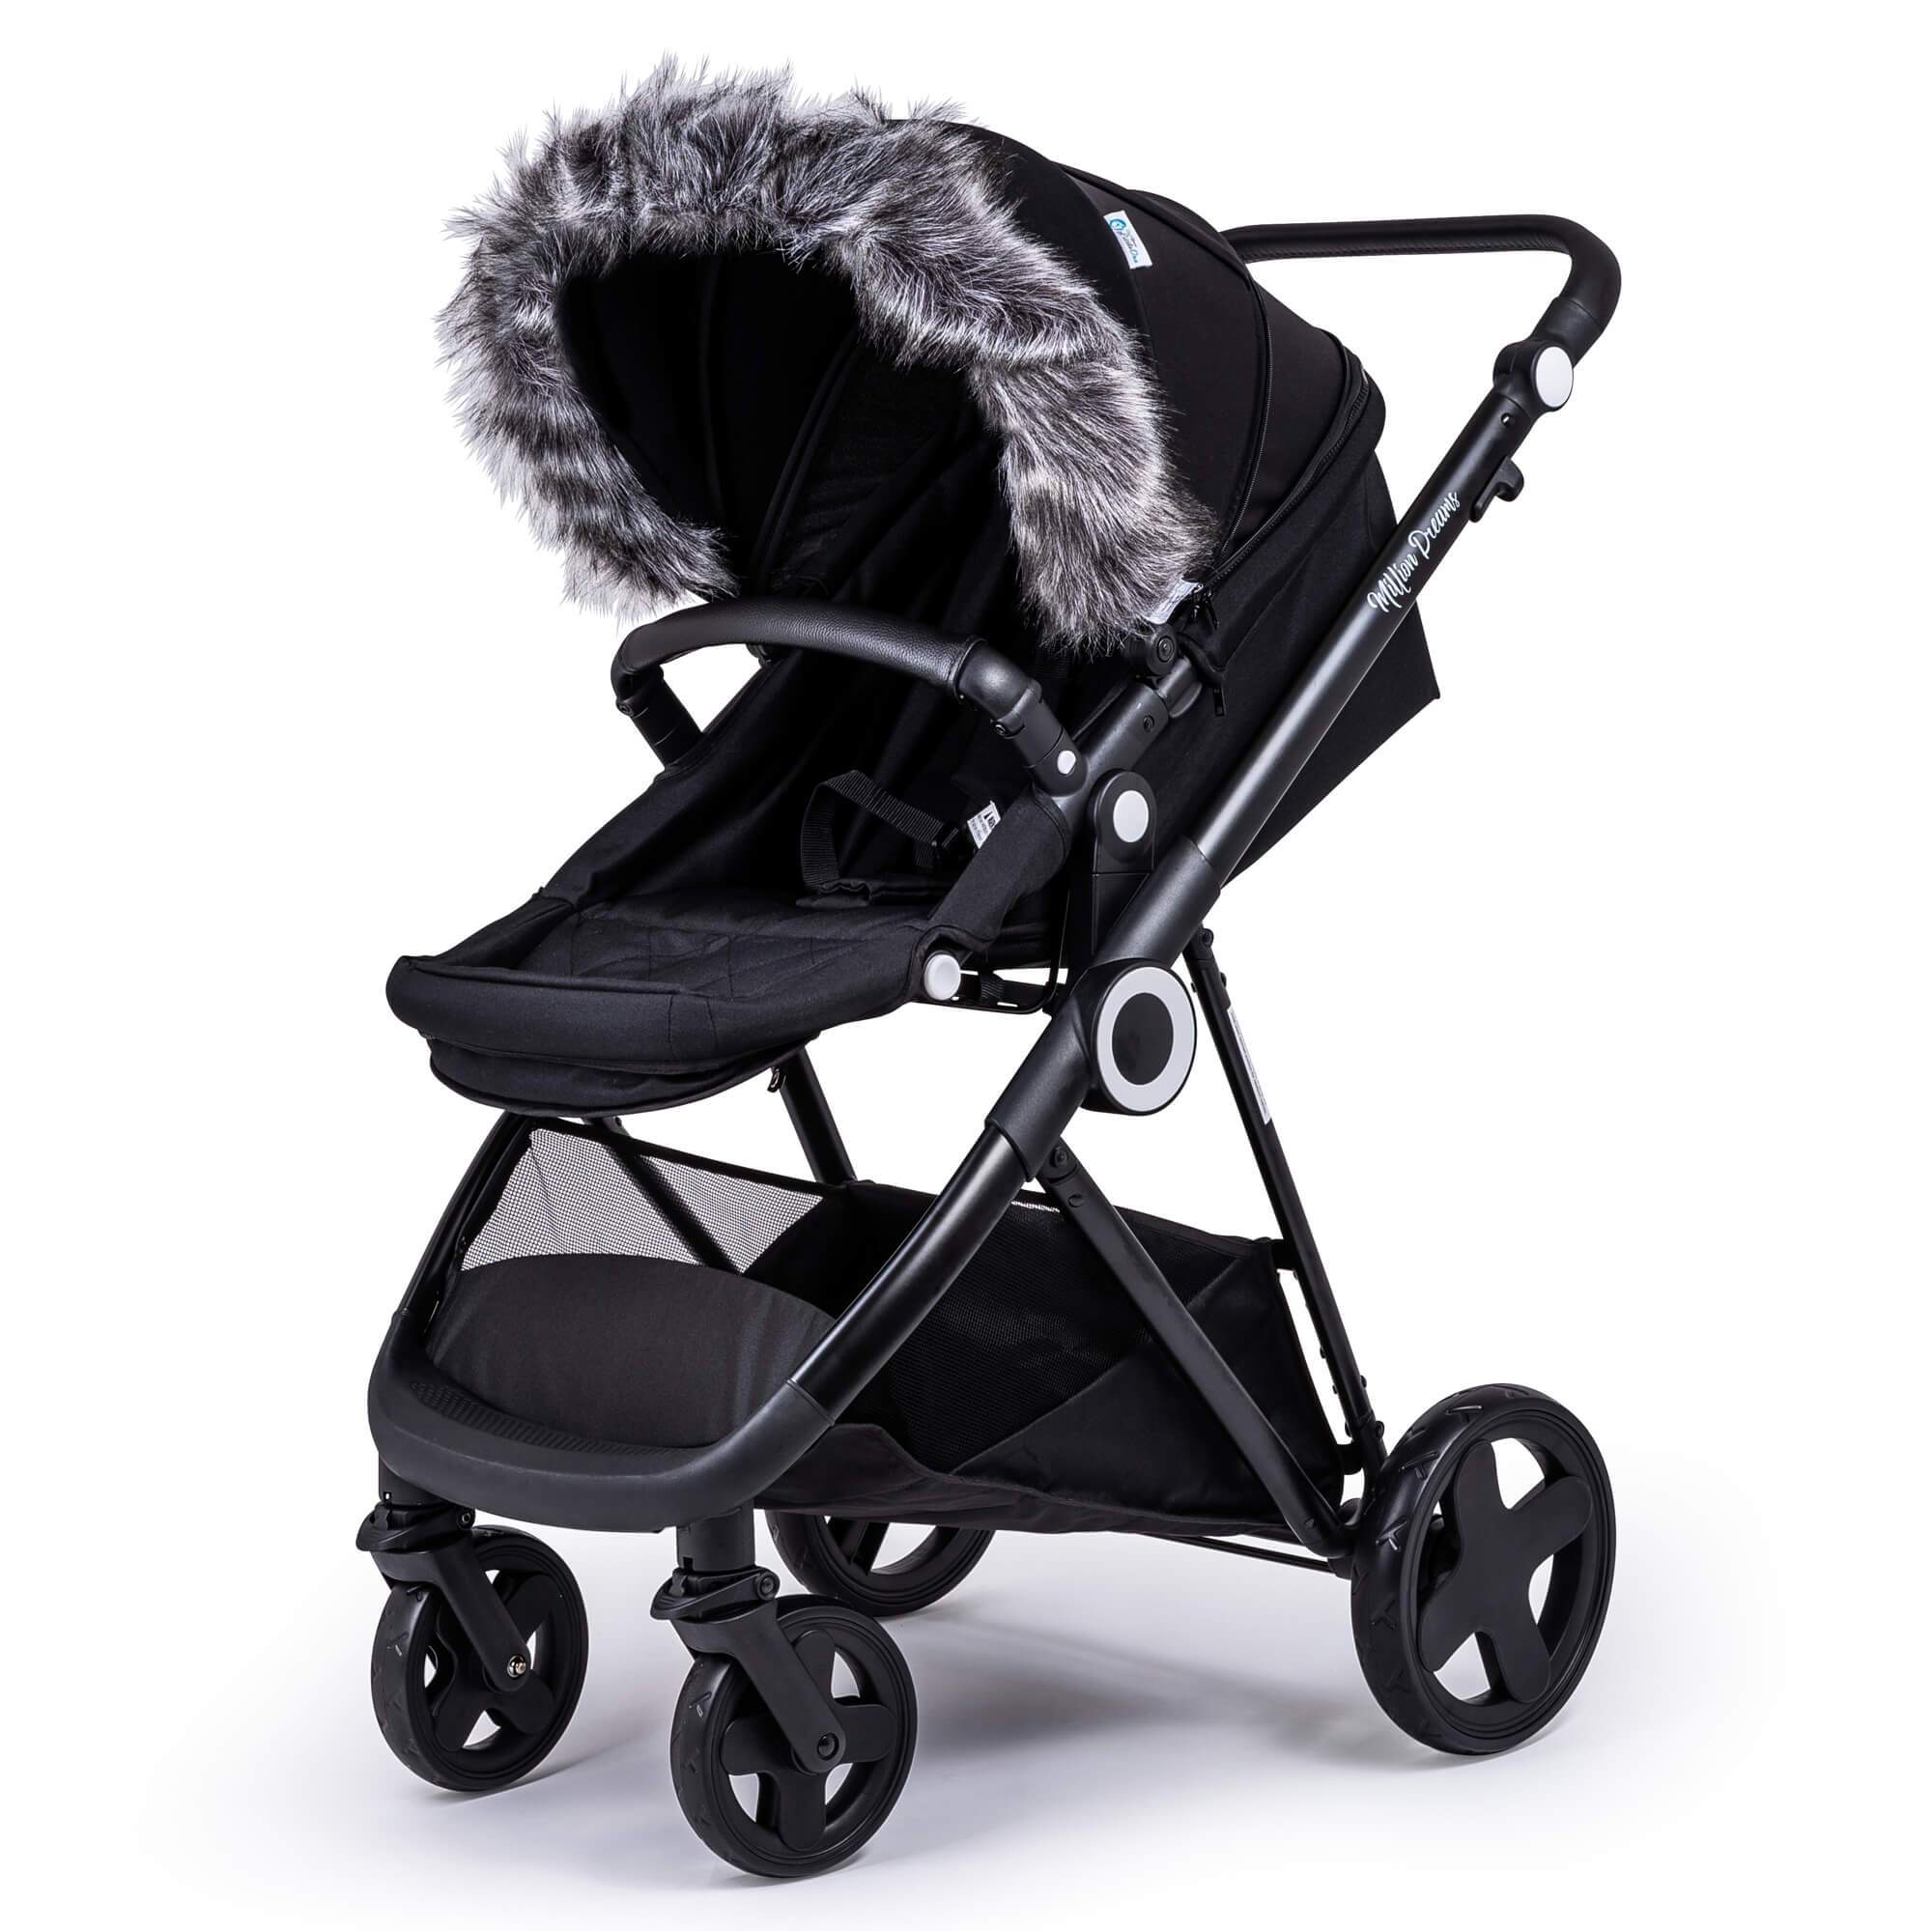 Pram Fur Hood Trim Attachment for Pushchair Compatible with Joolz - Dark Grey / Fits All Models | For Your Little One